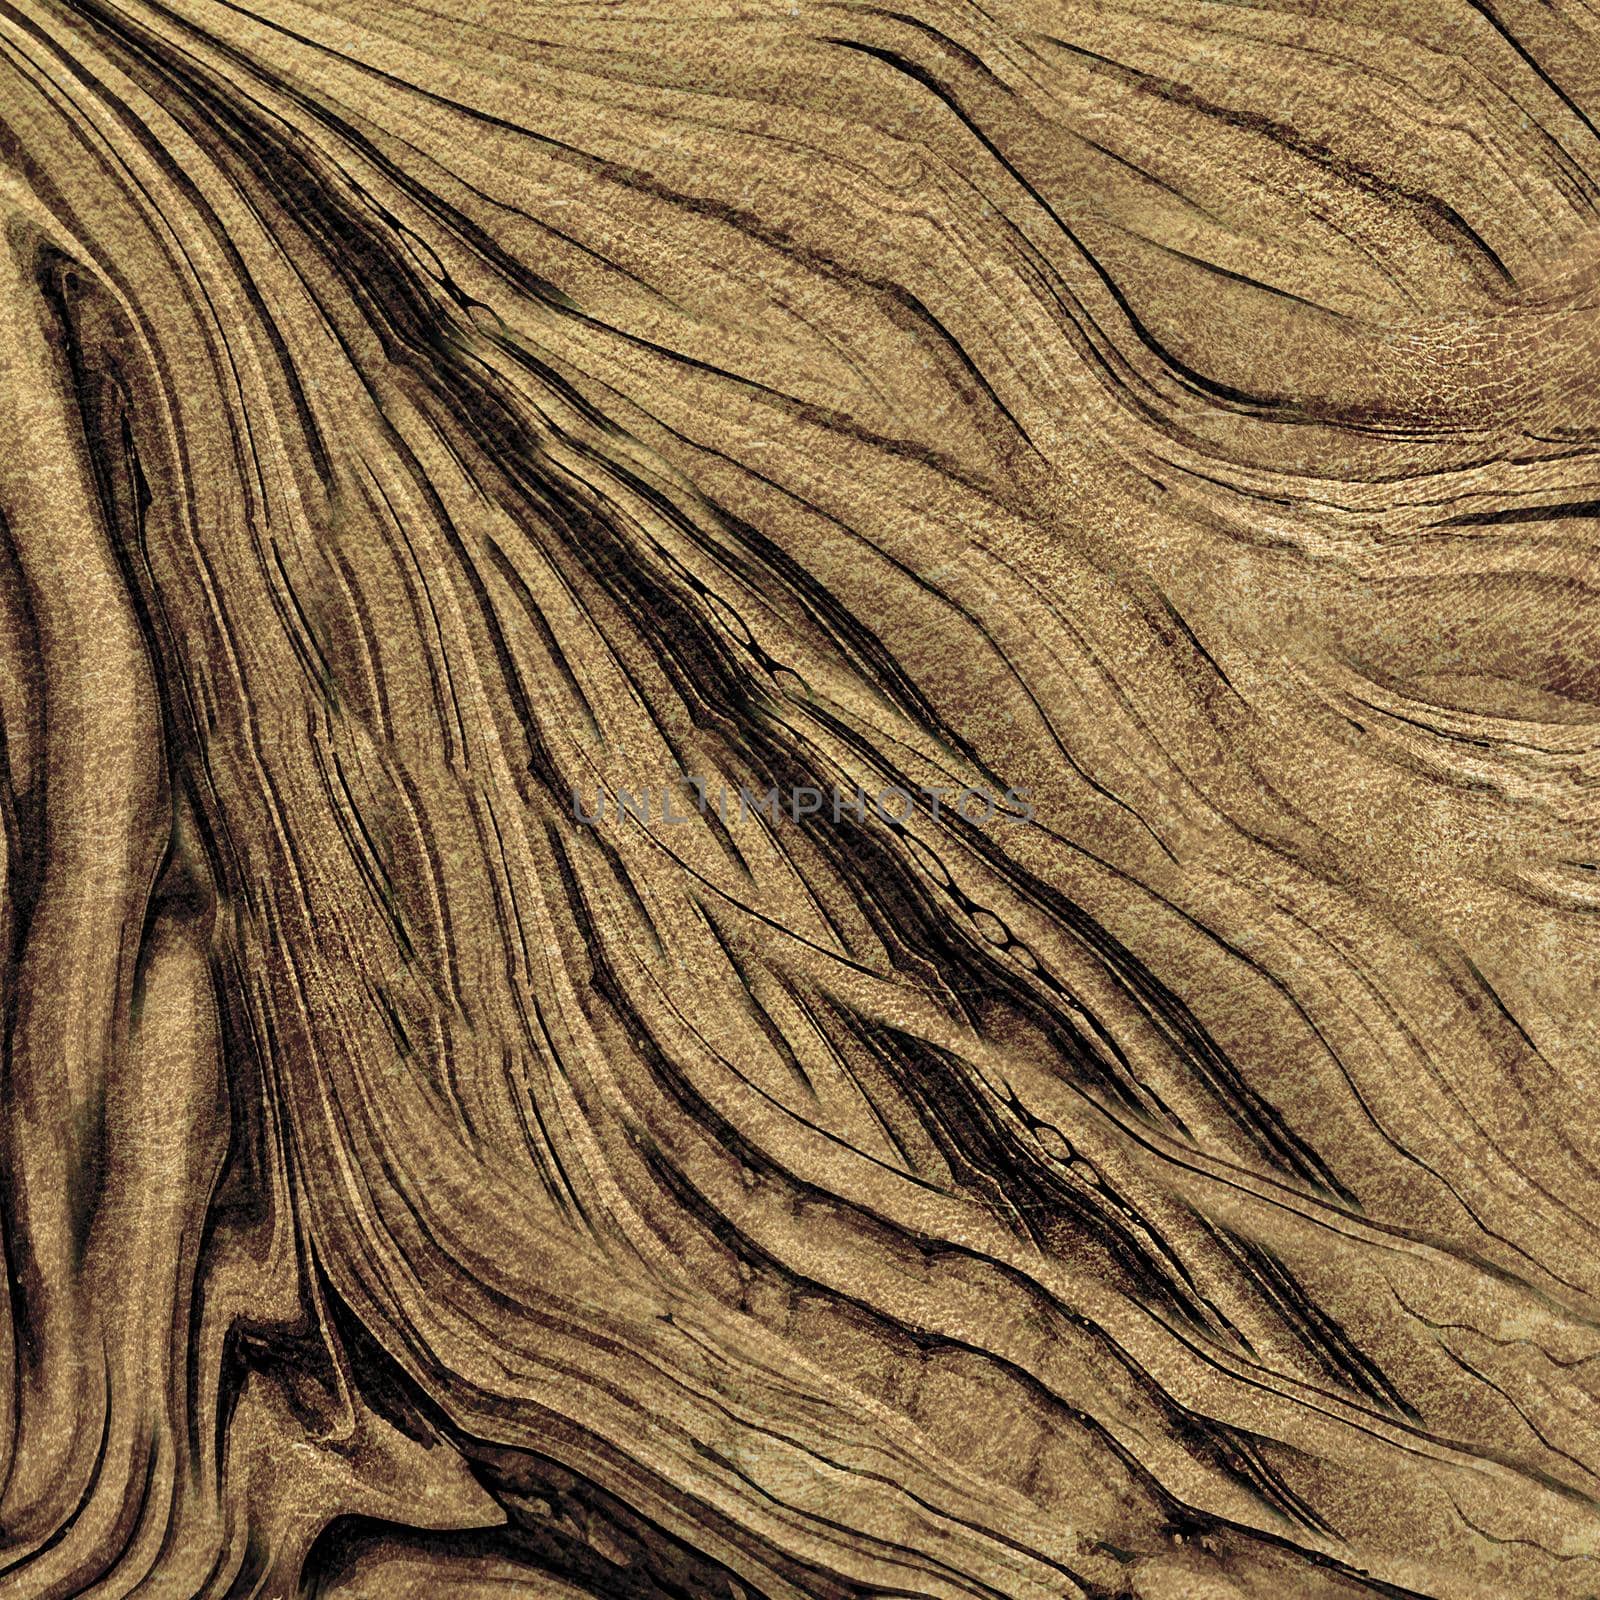 Textured wave streaks on the brown surface.Texture or background